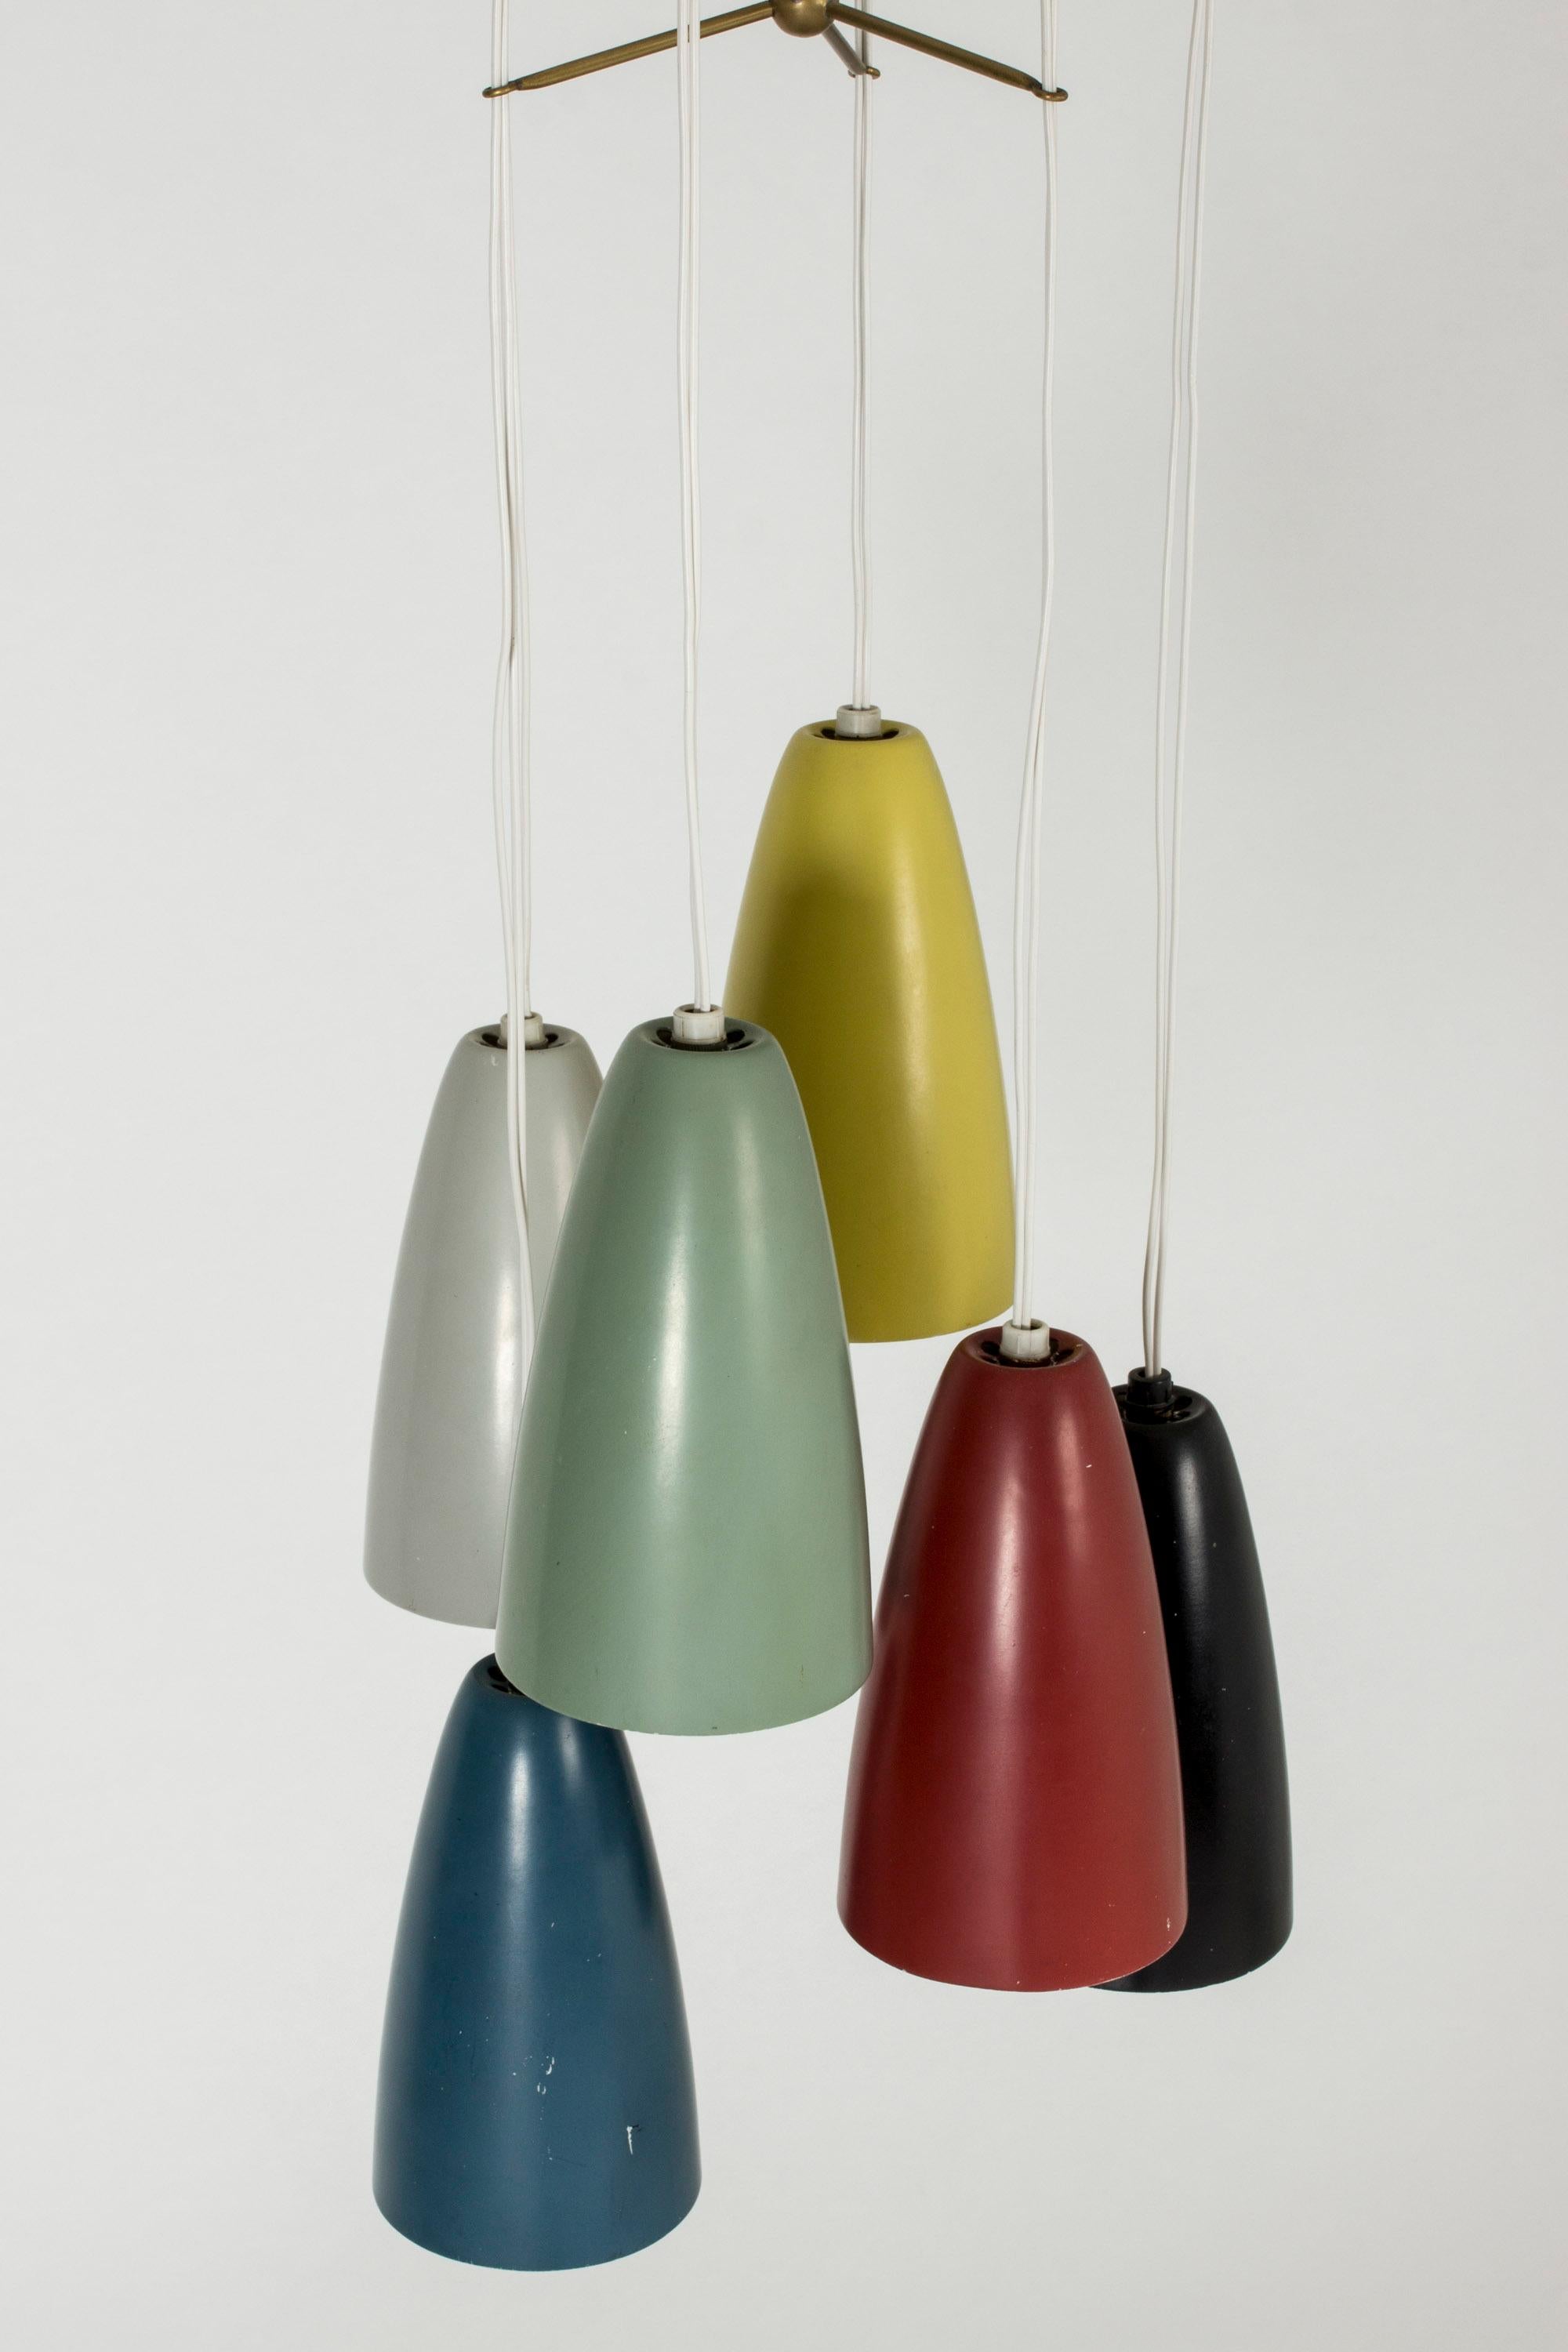 Amazing, unique ceiling lamp with multiple shades in different colors by Hans Bergström. Six shades in red, yellow, blue, black grey and dusty green, whose cords are gathered by brass bars shooting out from a ball in the center.

The length of the